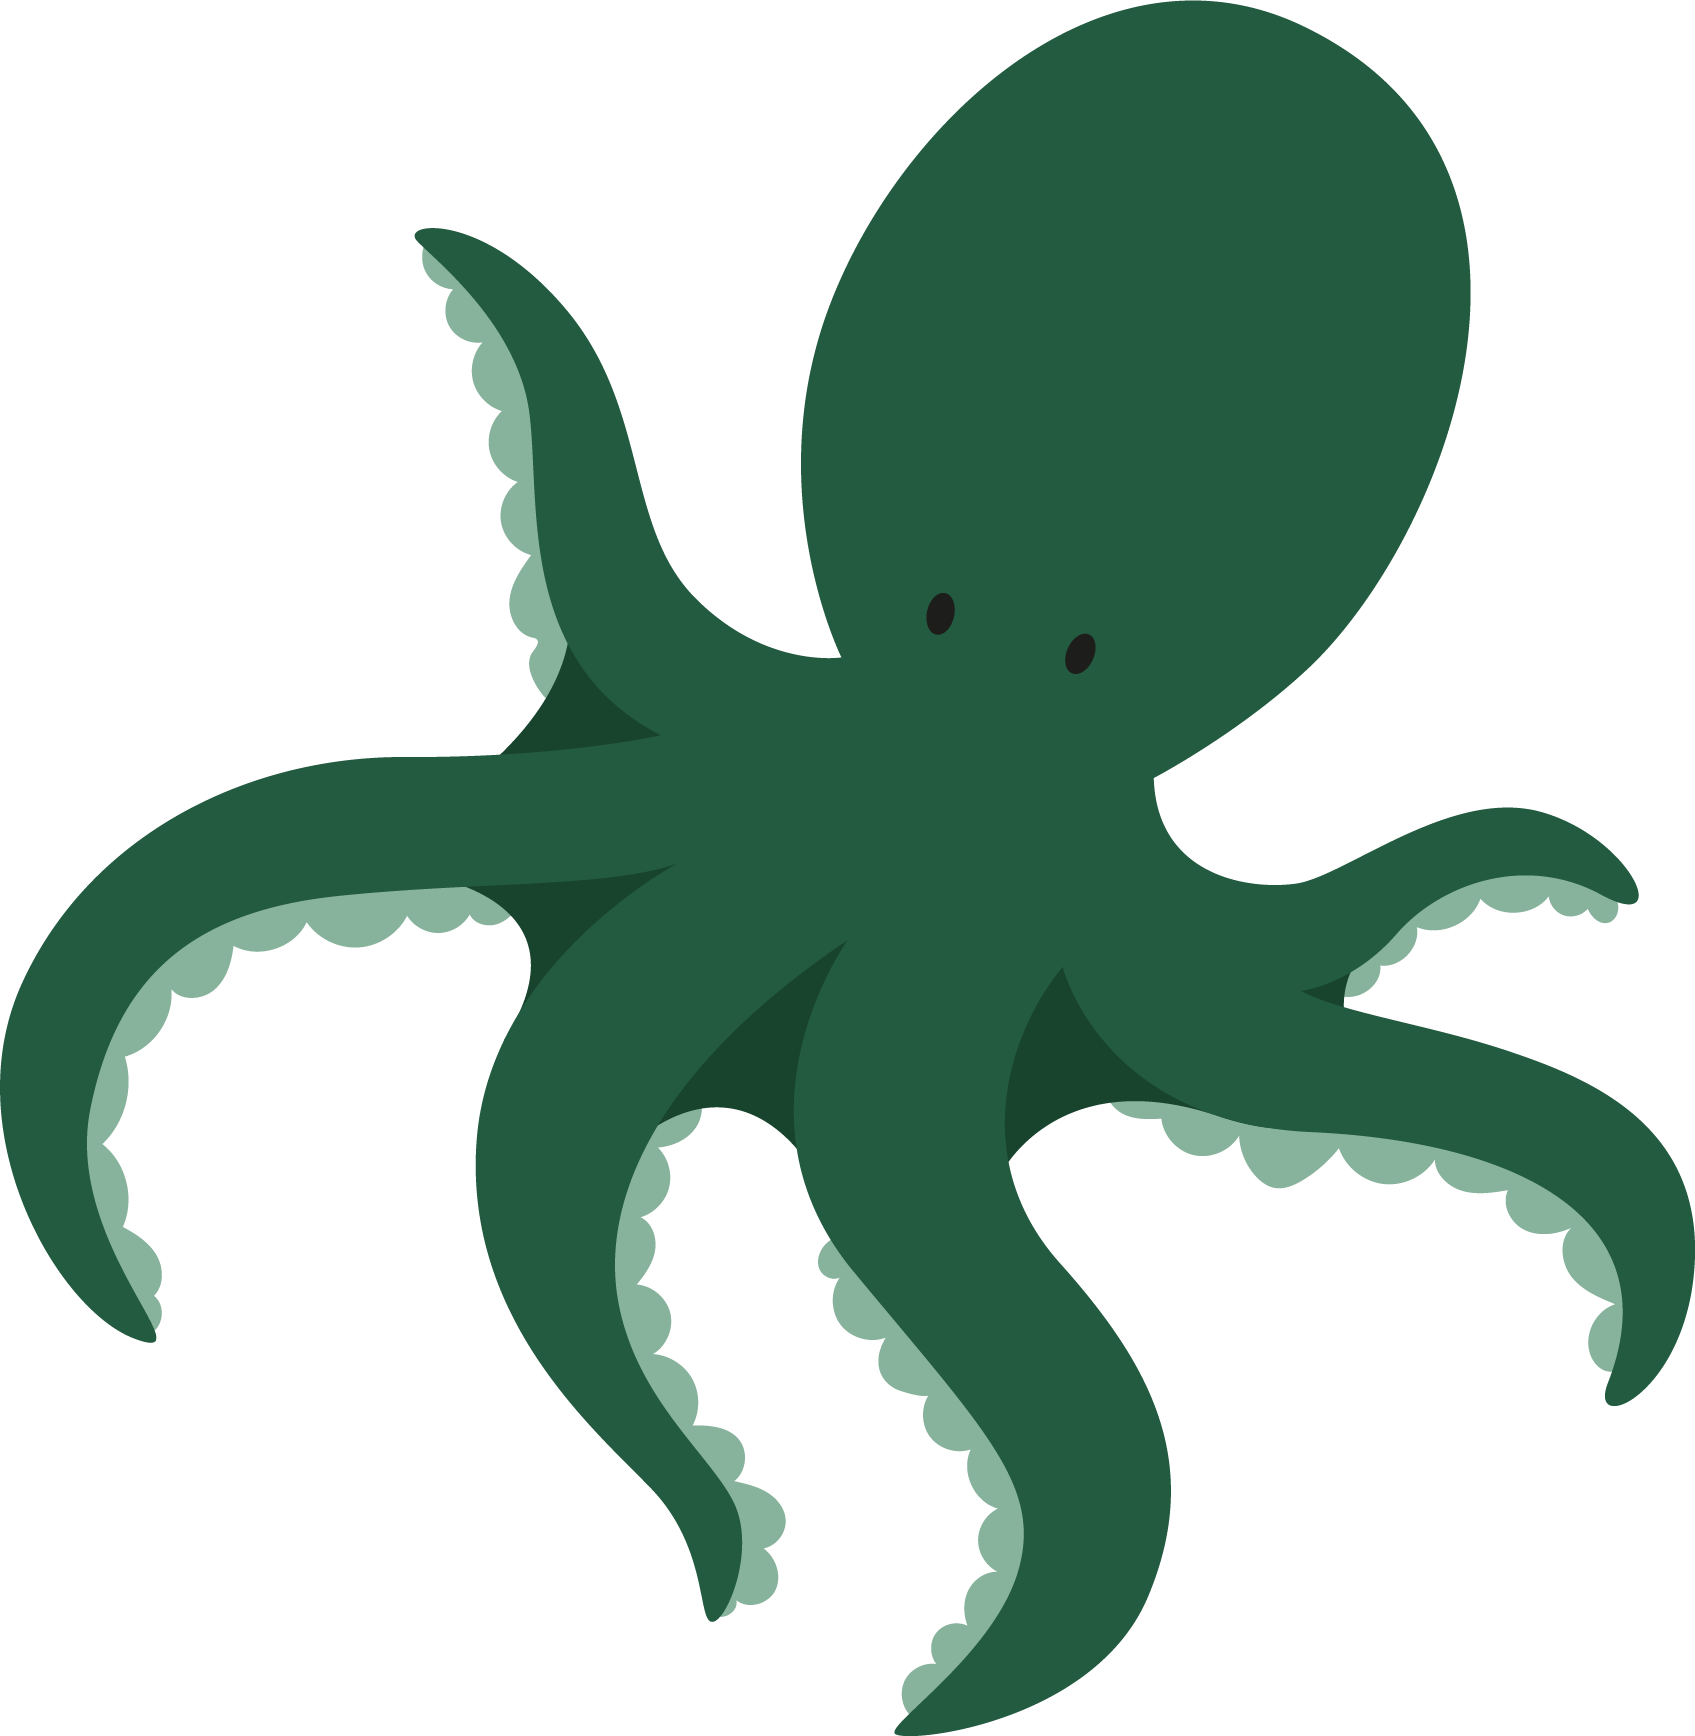 Octopus png transparent free. Fossil clipart invertebrate